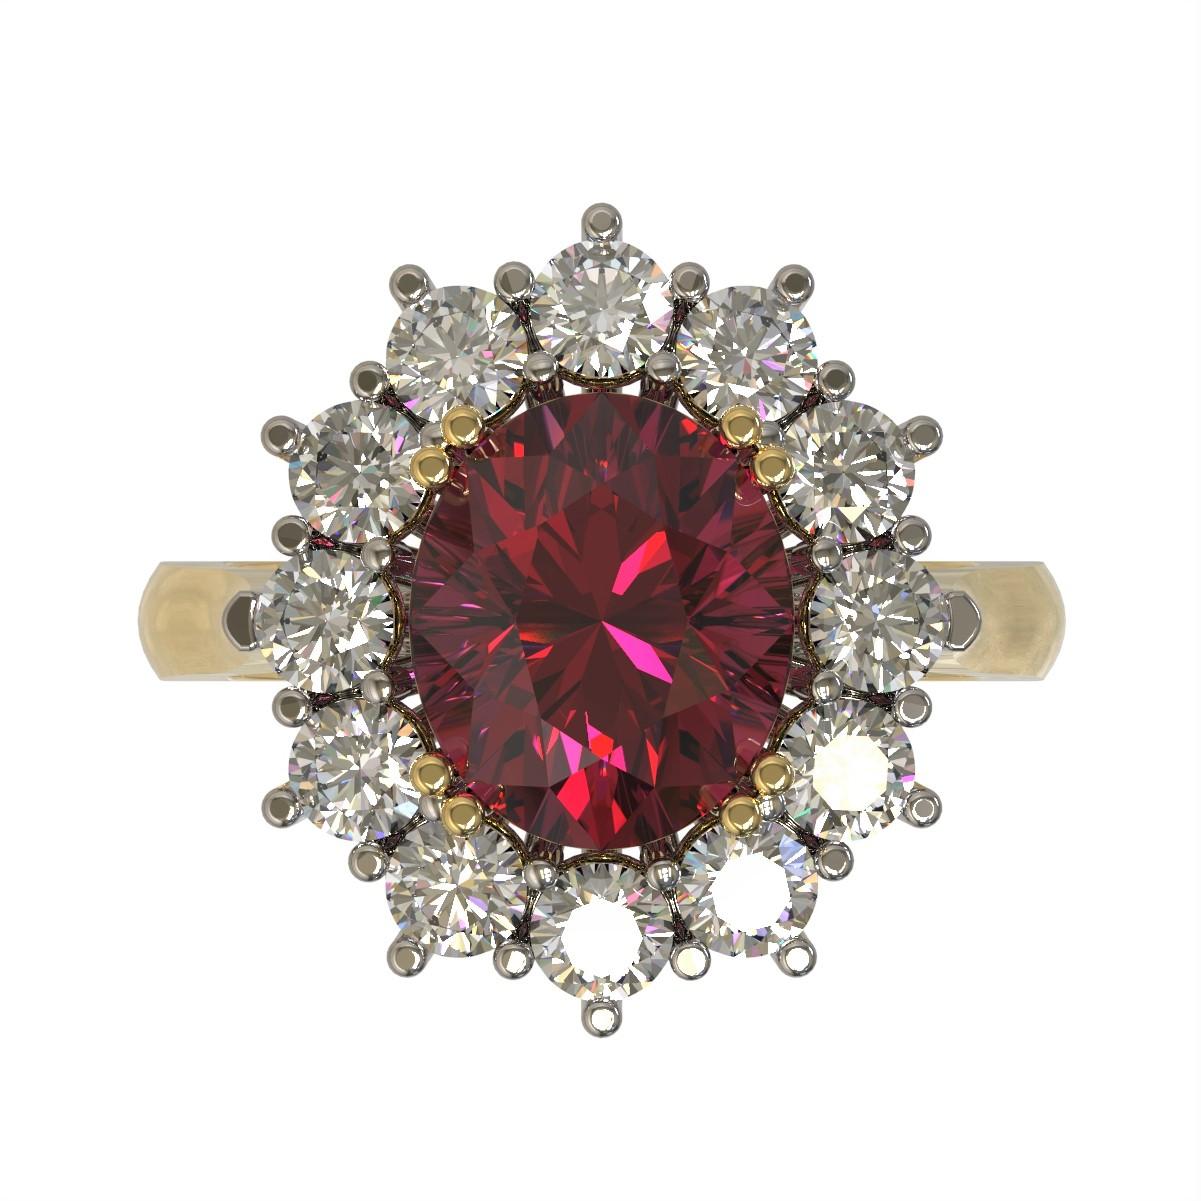 4.32 Carat Oval Rhodolite and Diamonds Cocktail Ring in Platinum & 18 Carat Gold For Sale 1